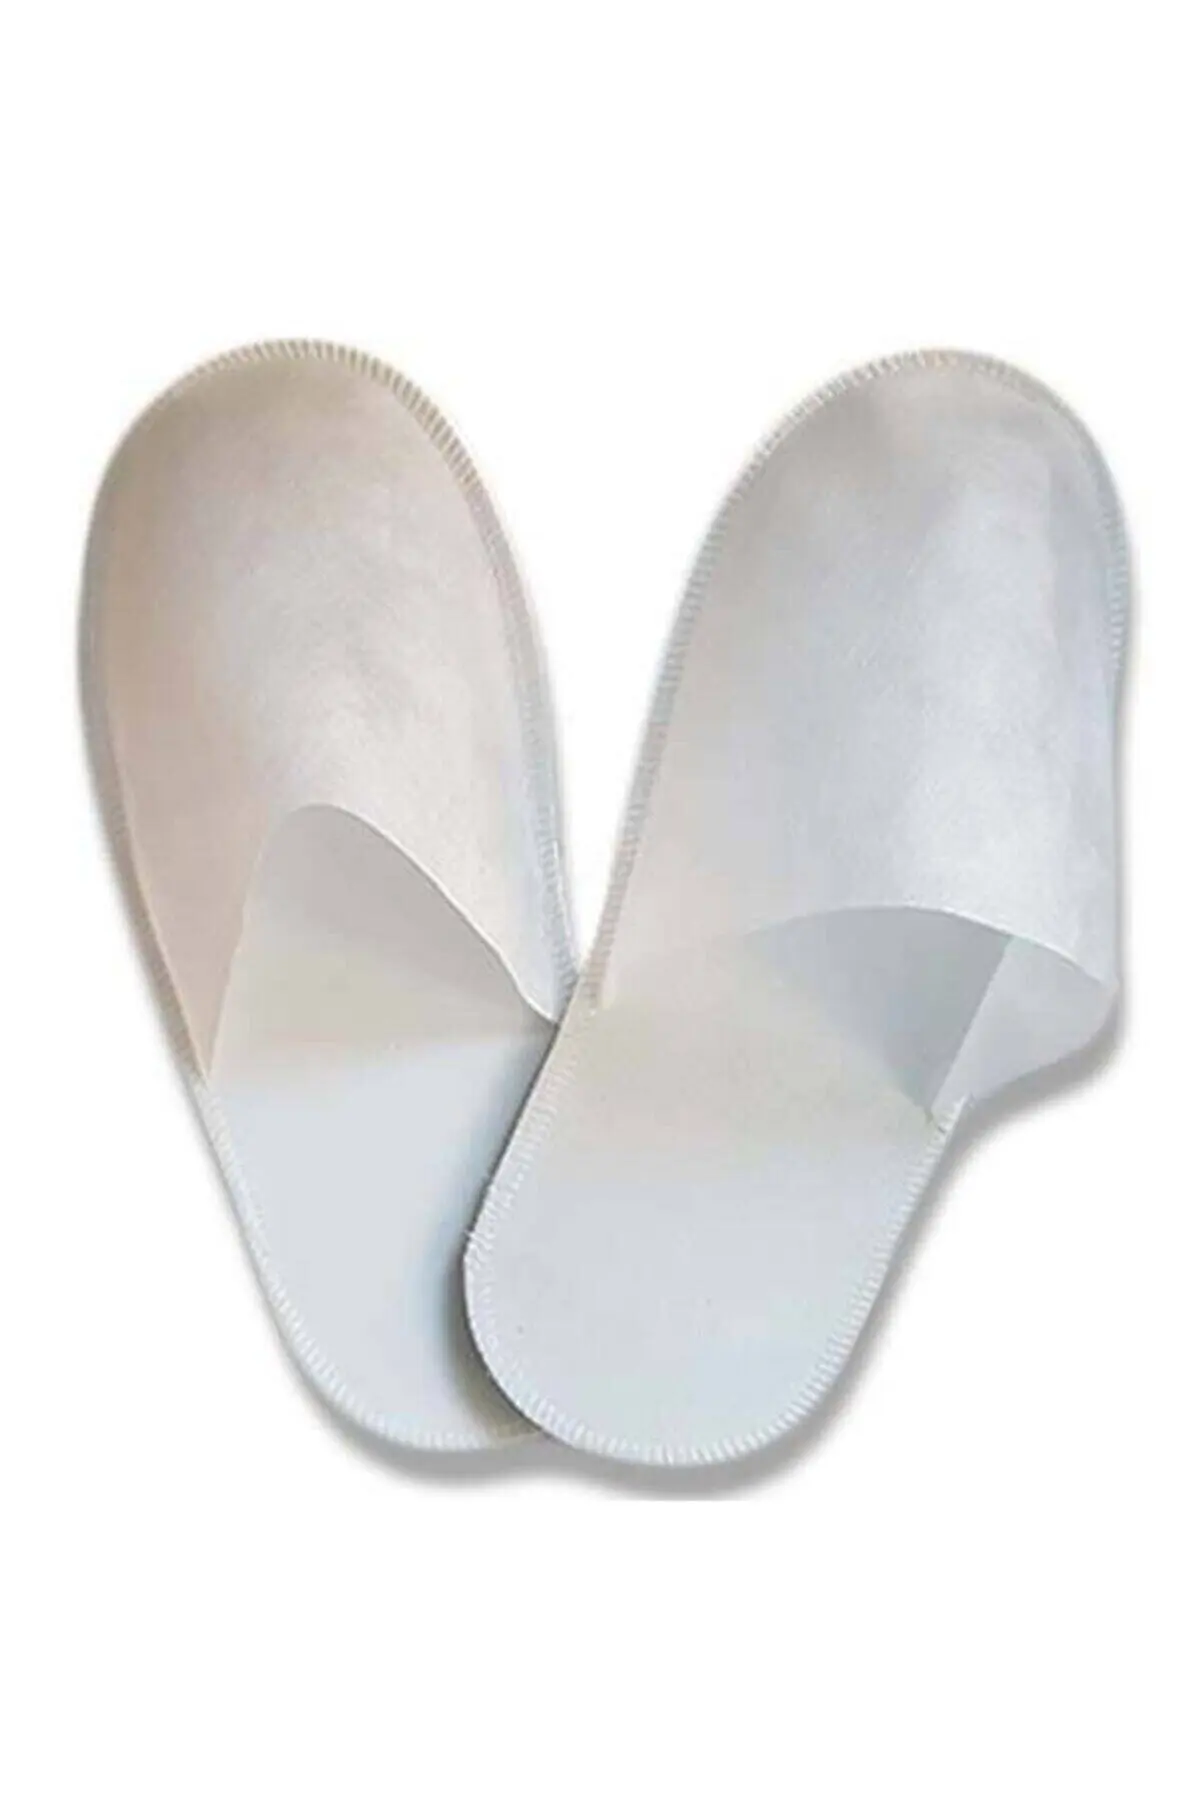 5 Pairs SPA Slippers,Assorted Color,Closed toe for  Family,Guests,Travel,Hotel,Hospital,Washable,Portable,Disposable :  Amazon.sg: Beauty